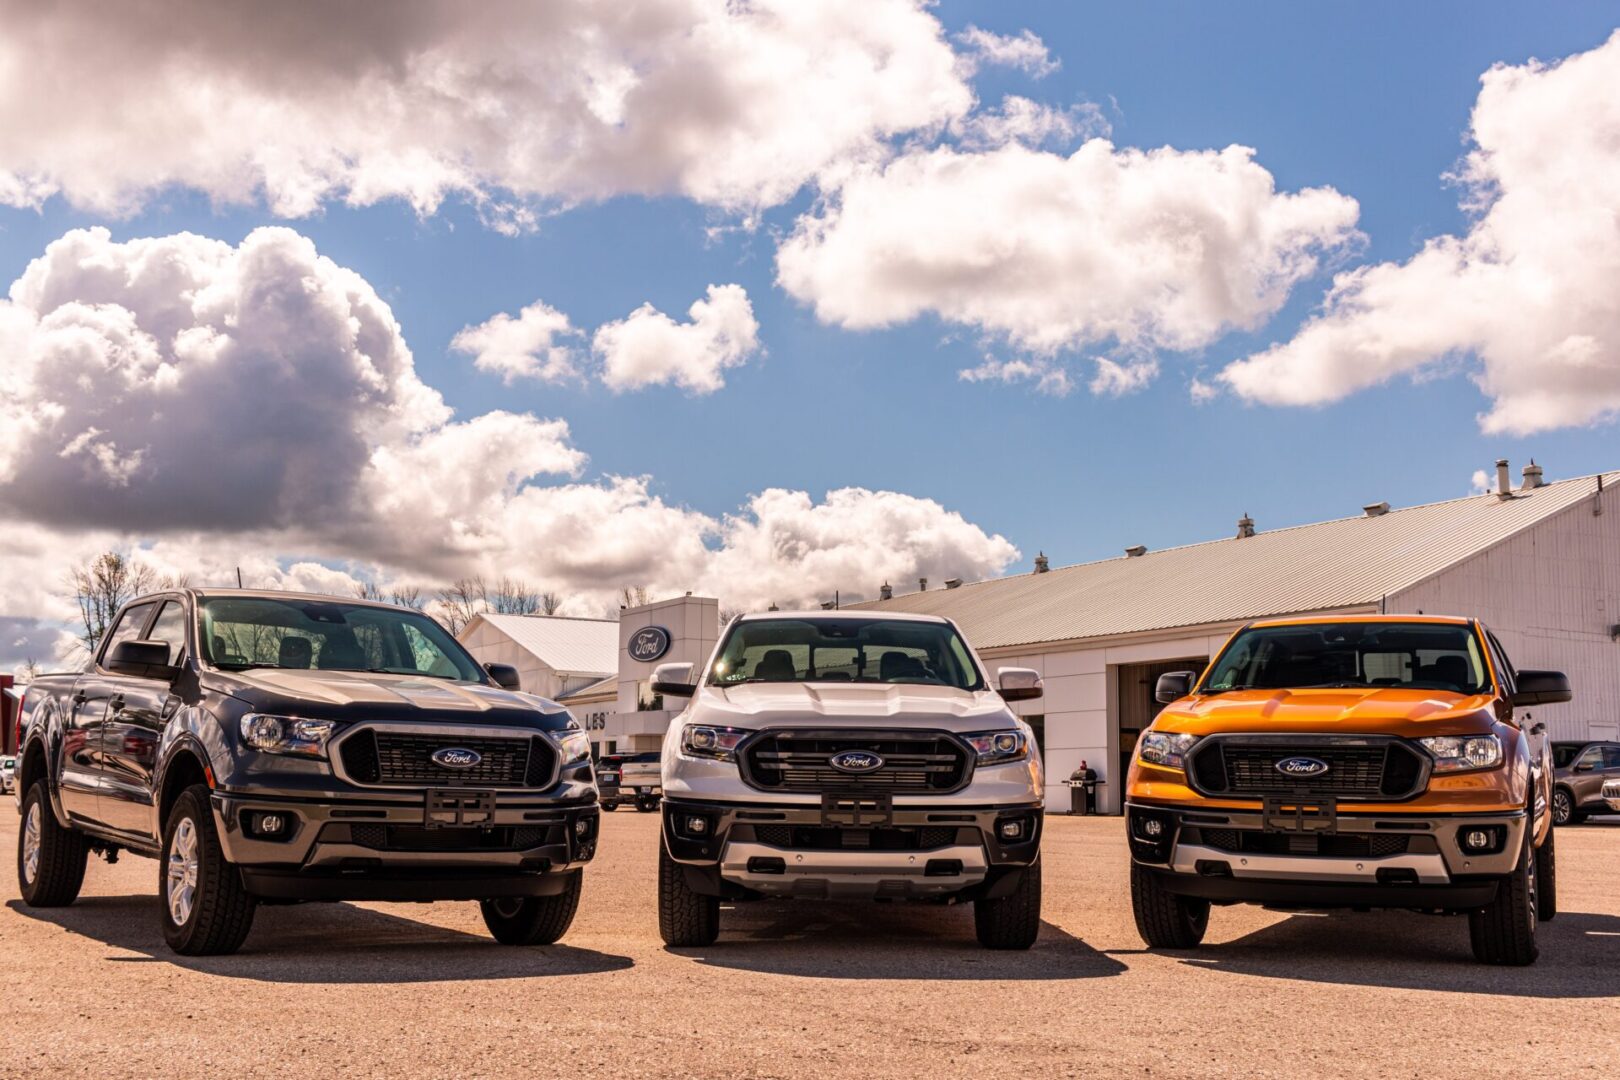 Three different trucks parked in a row under some clouds.